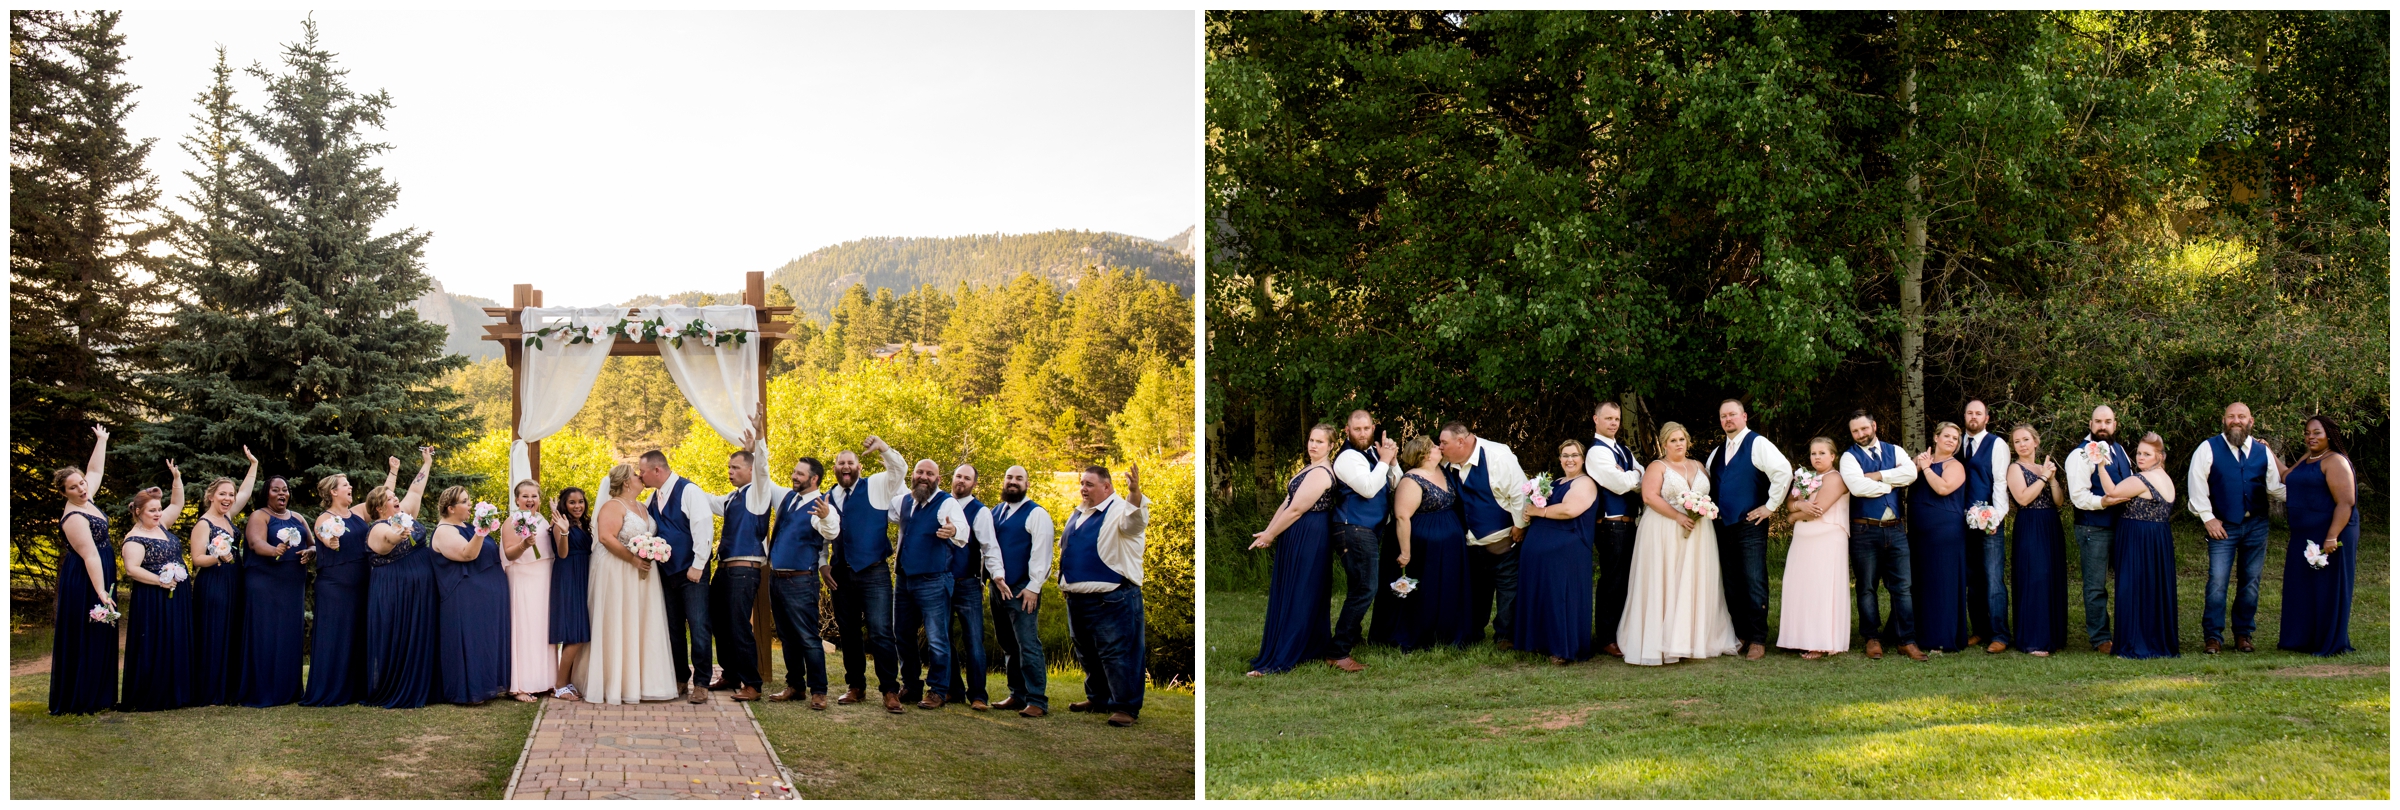 wedding party in navy blue and light pink posing under arbor at Pine Colorado wedding 